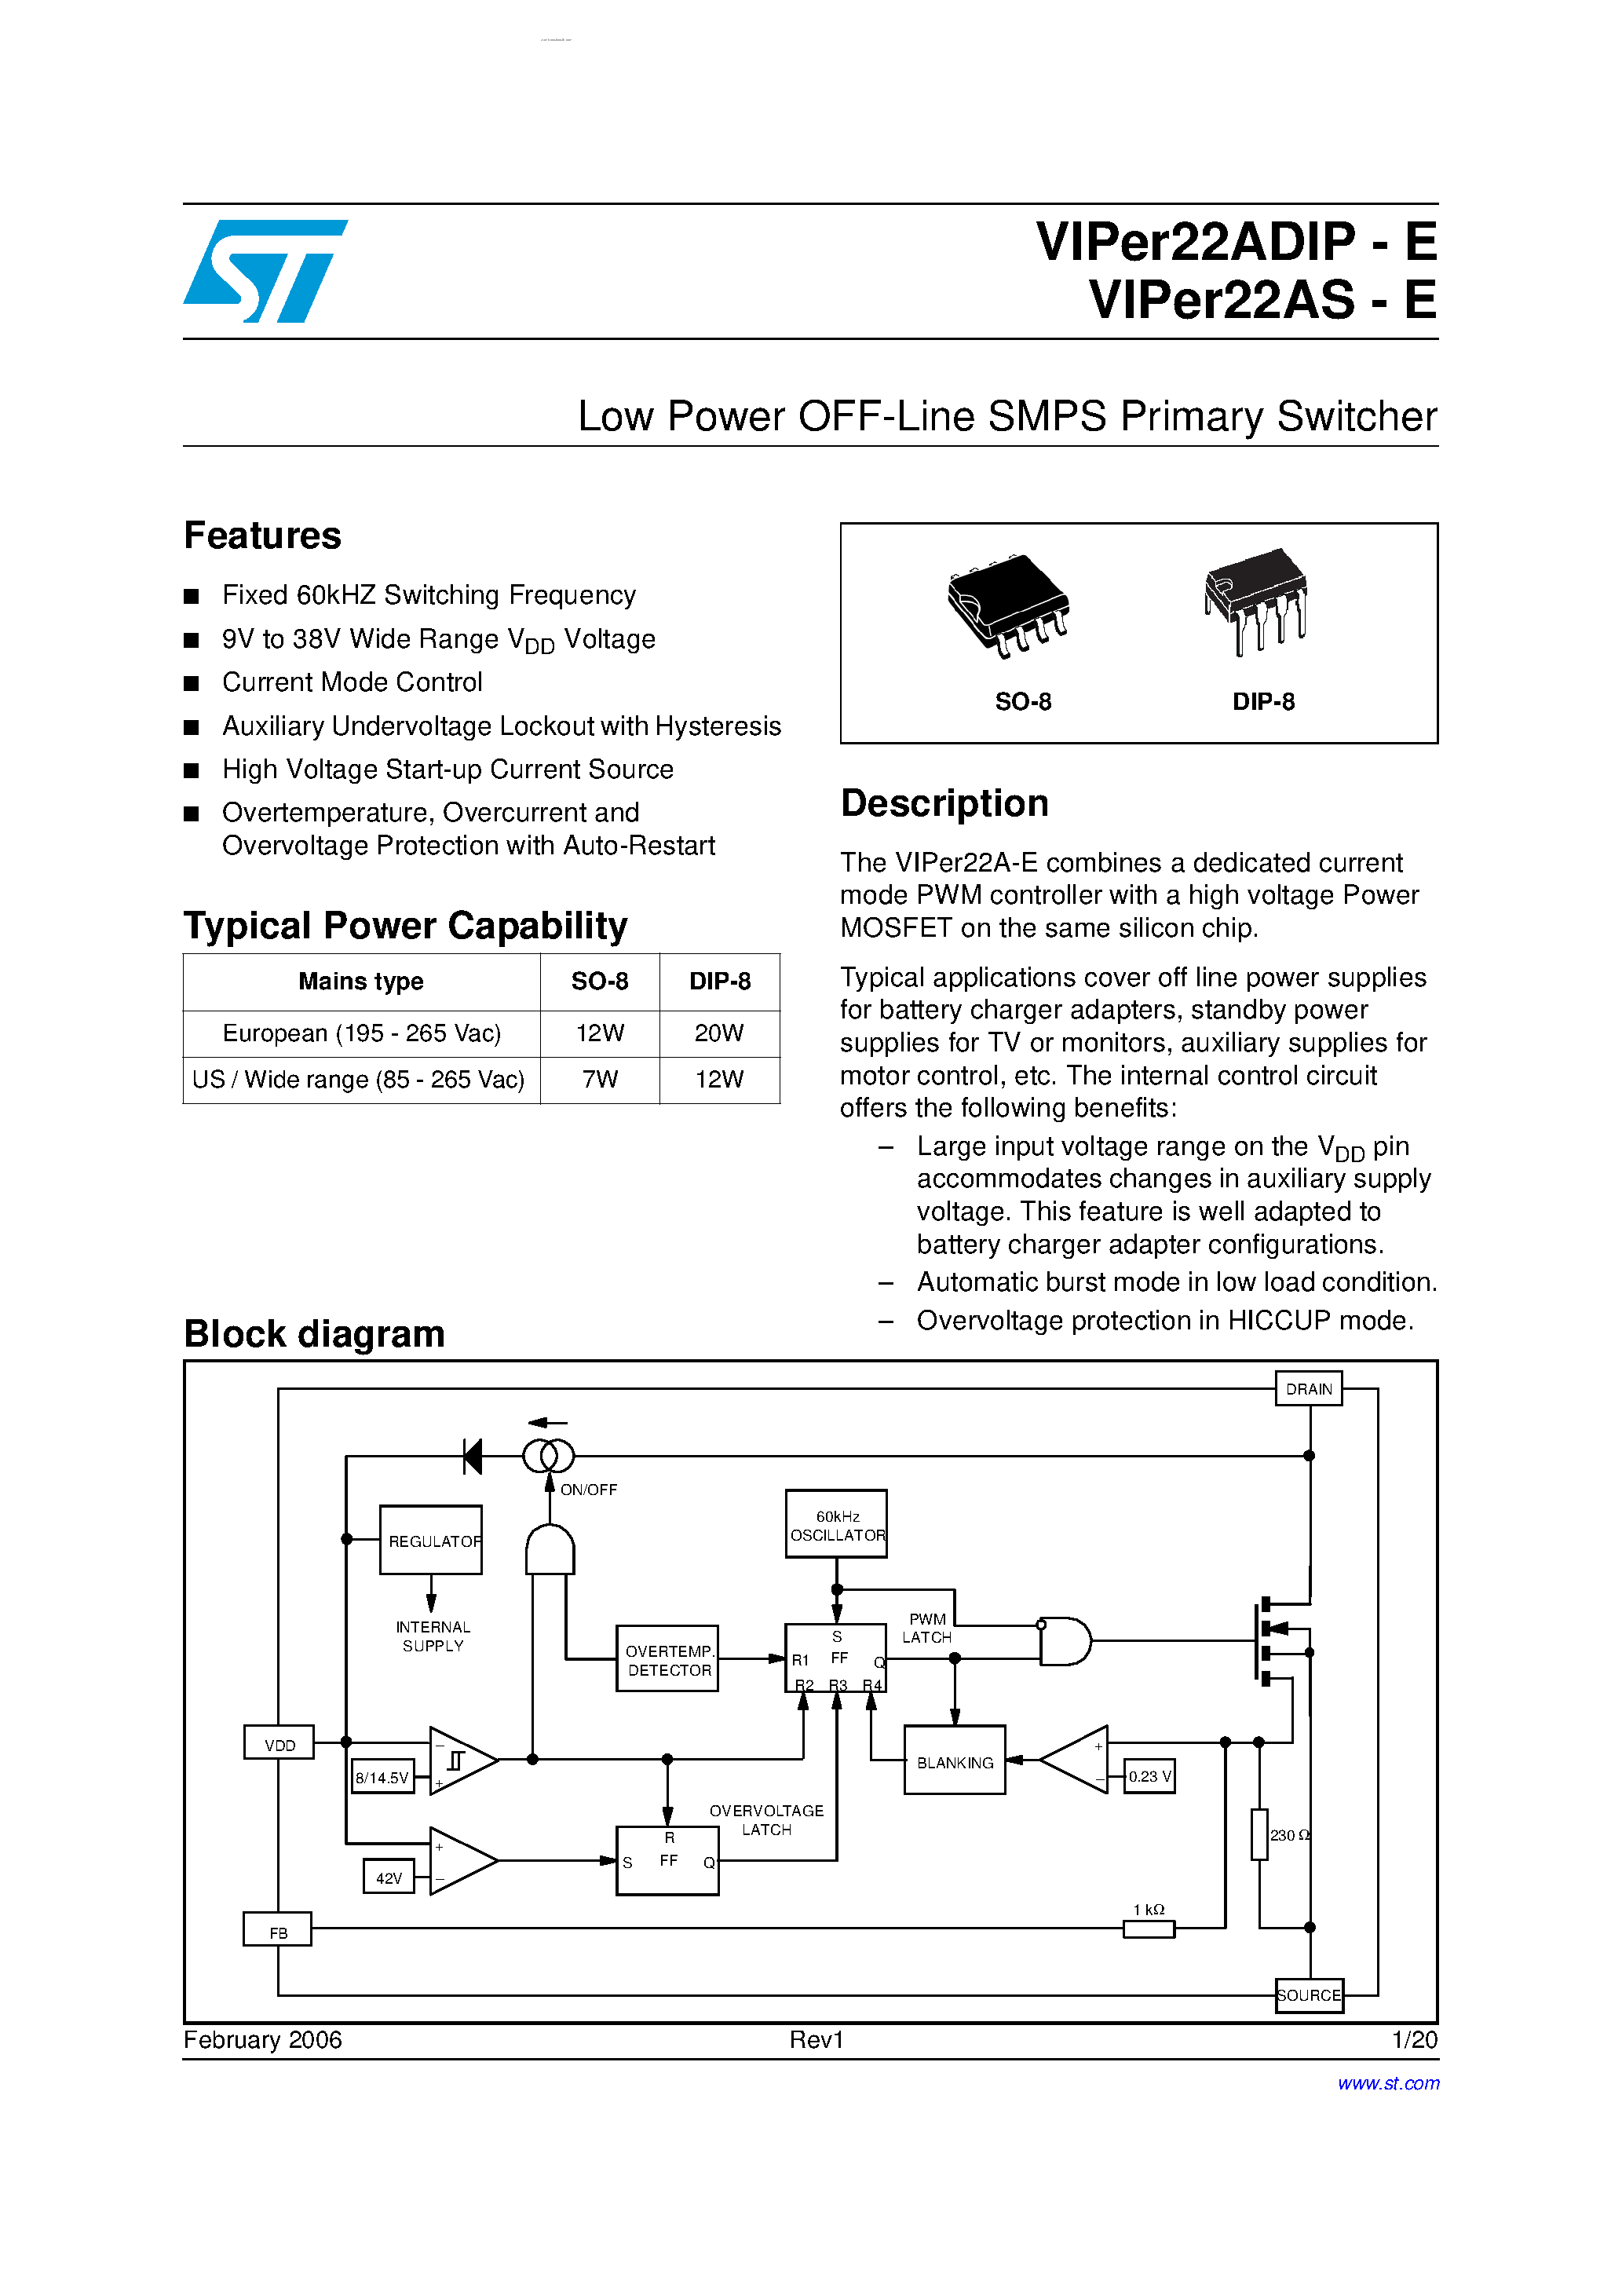 Datasheet VIPER22ADIP-E - Low Power OFF-Line SMPS Primary Switcher page 1